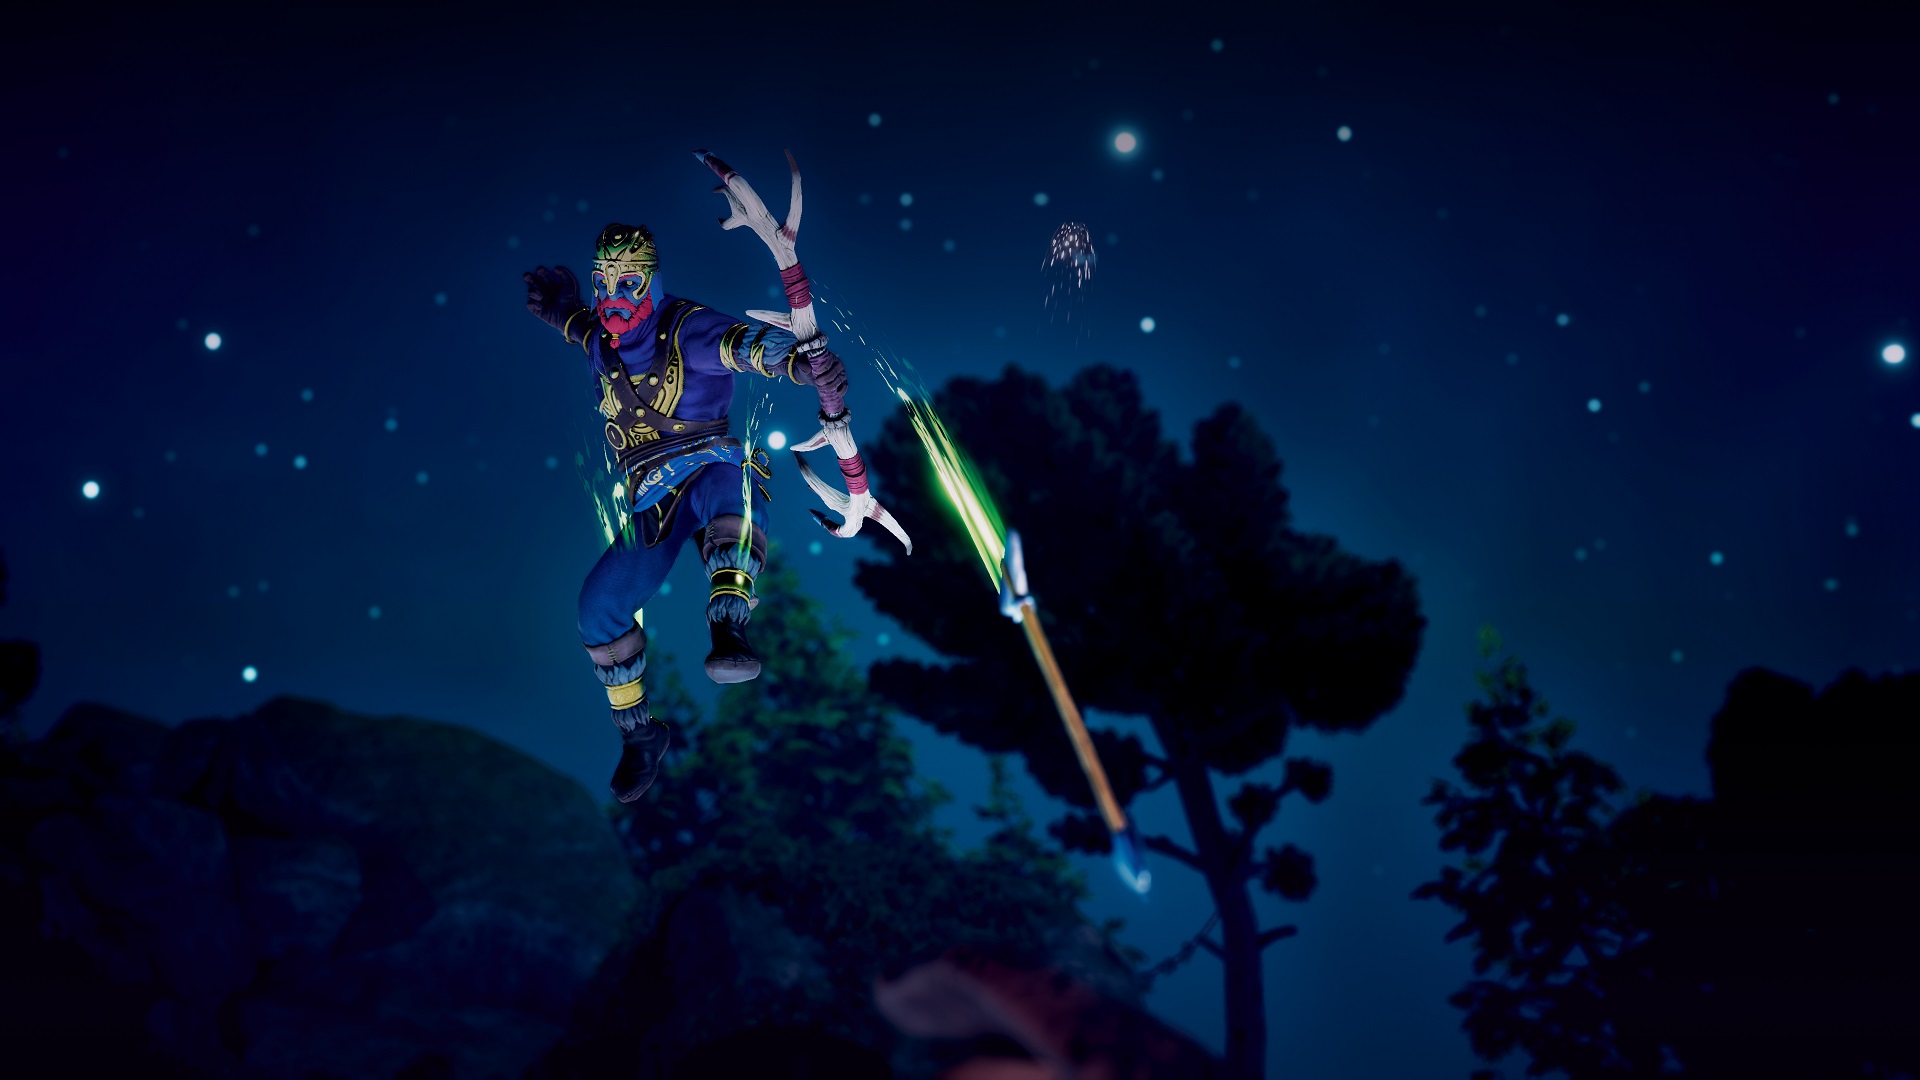 The Waylanders, a Celtic time-travel RPG, has an impressive voice cast